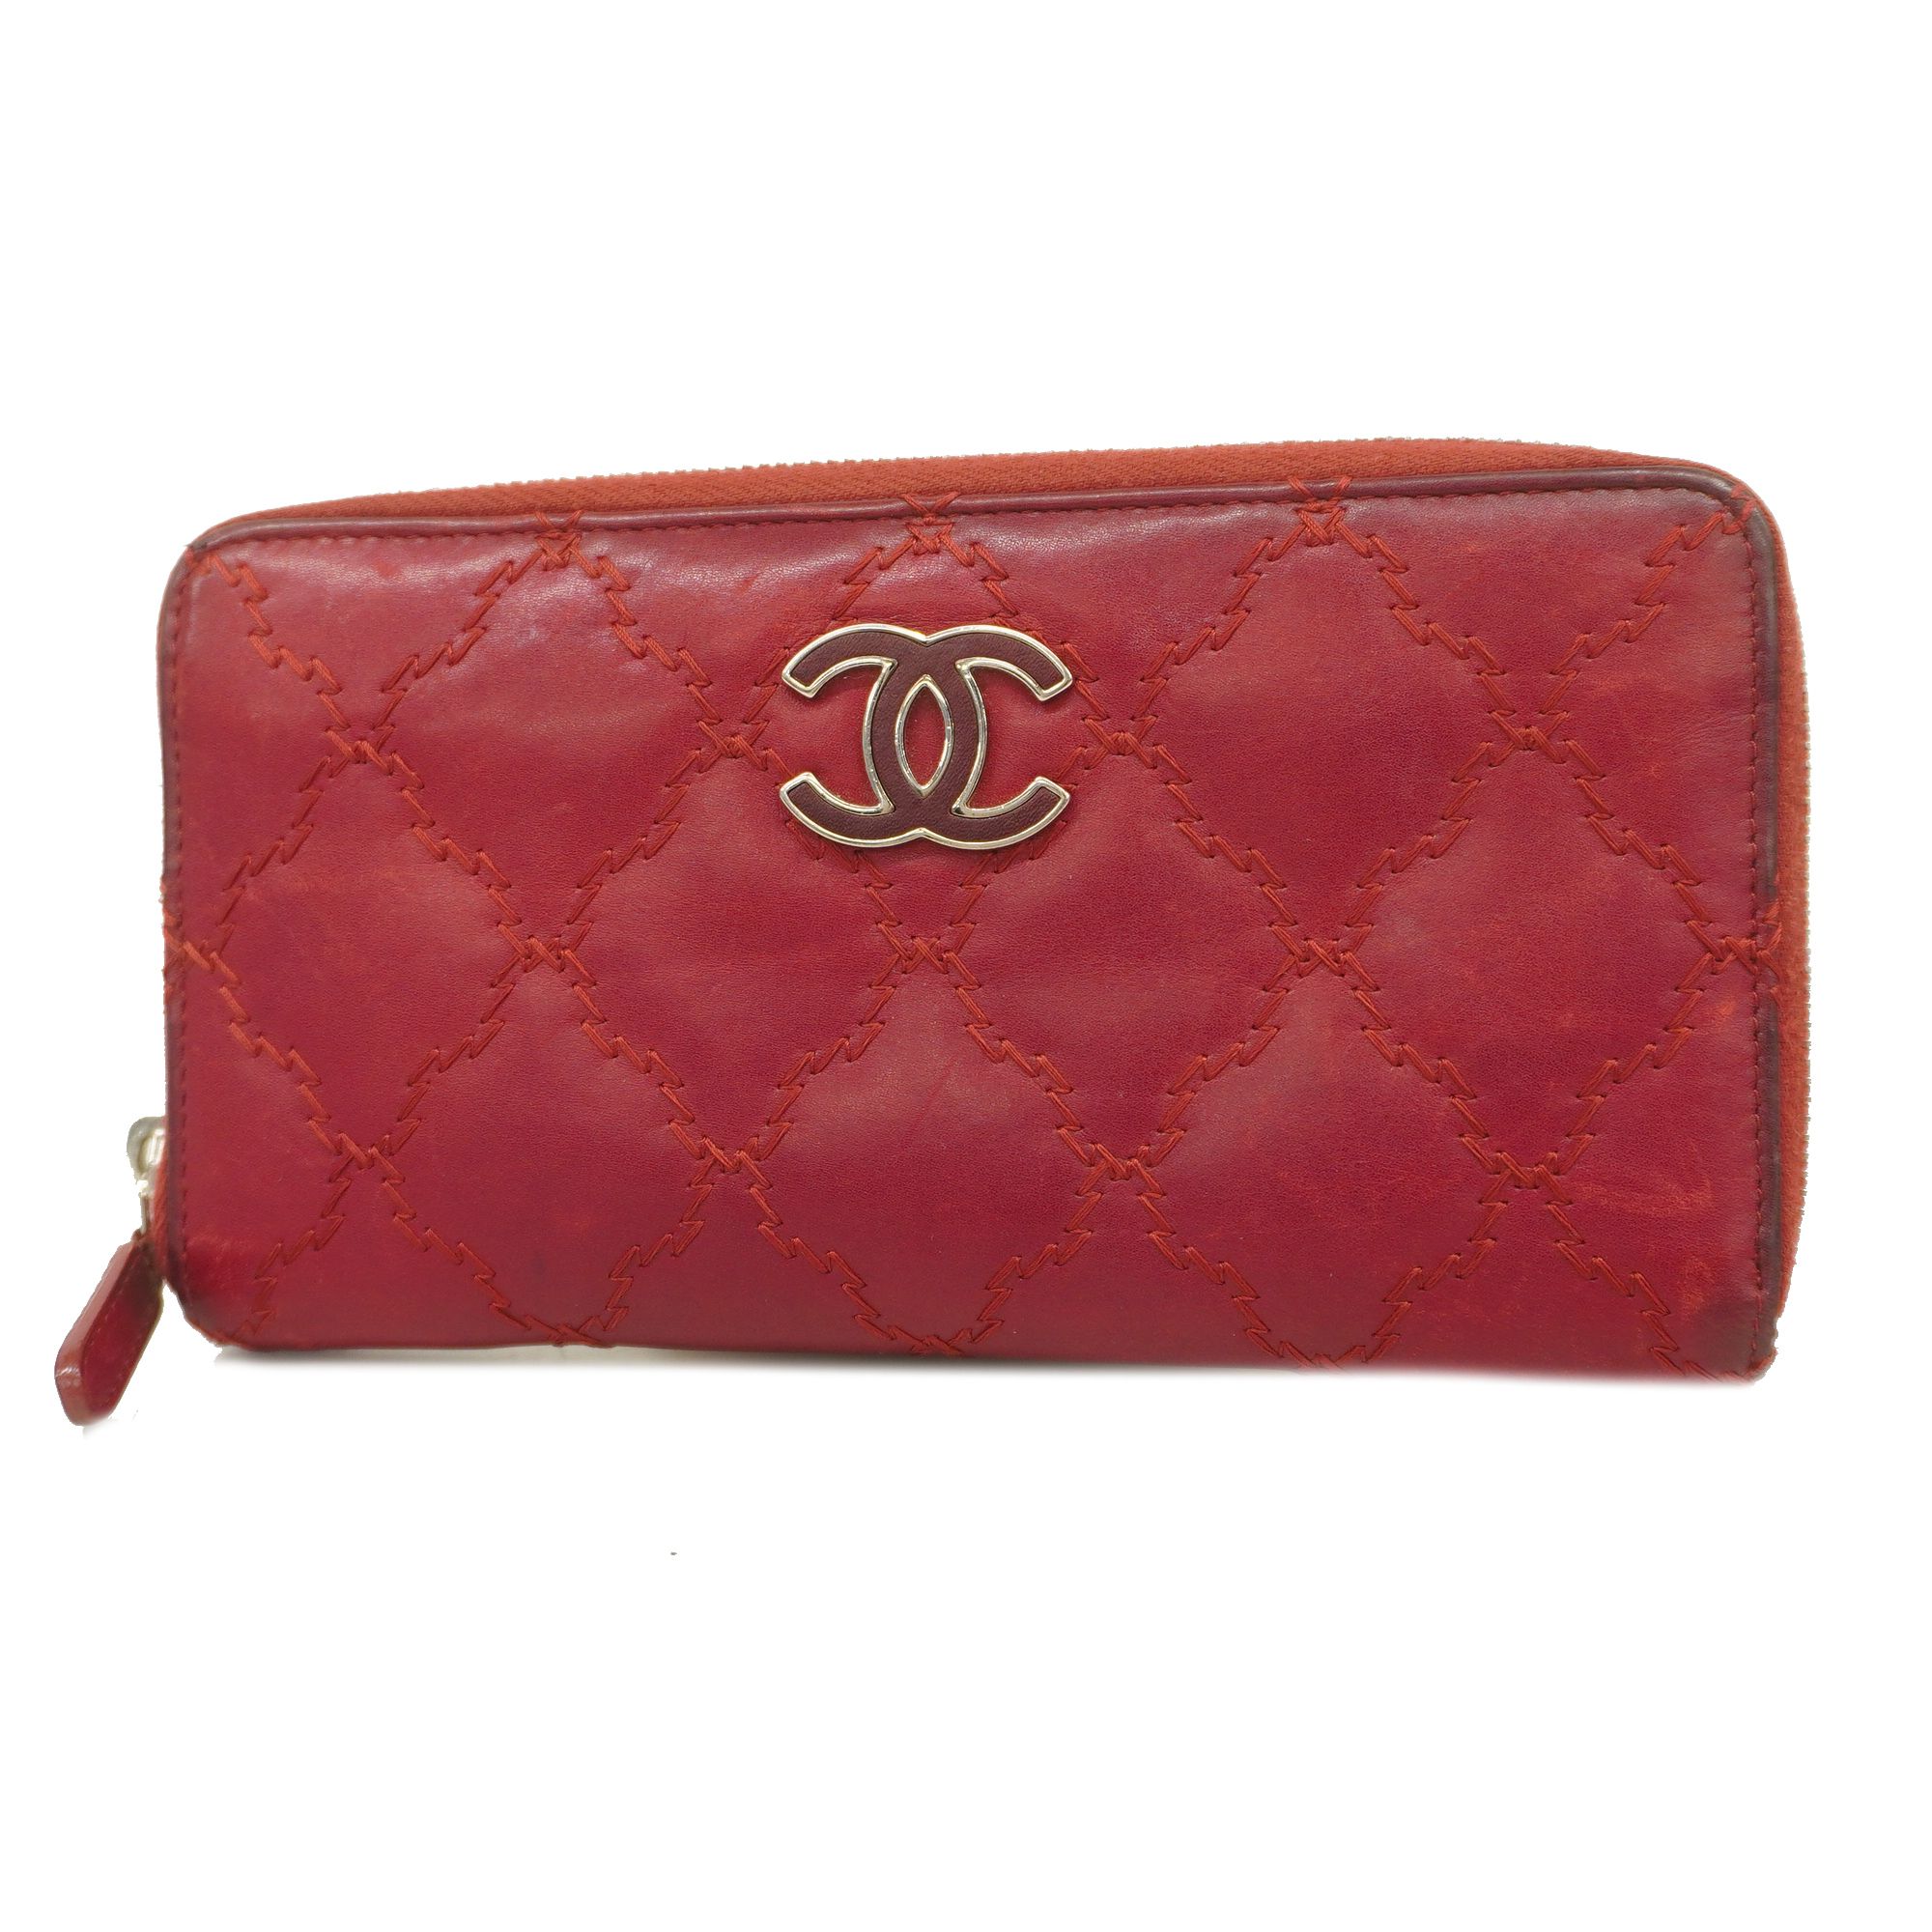 Auth CHANEL Matelasse Coco Mark Long Wallet enamel leather Red Cross-stitch